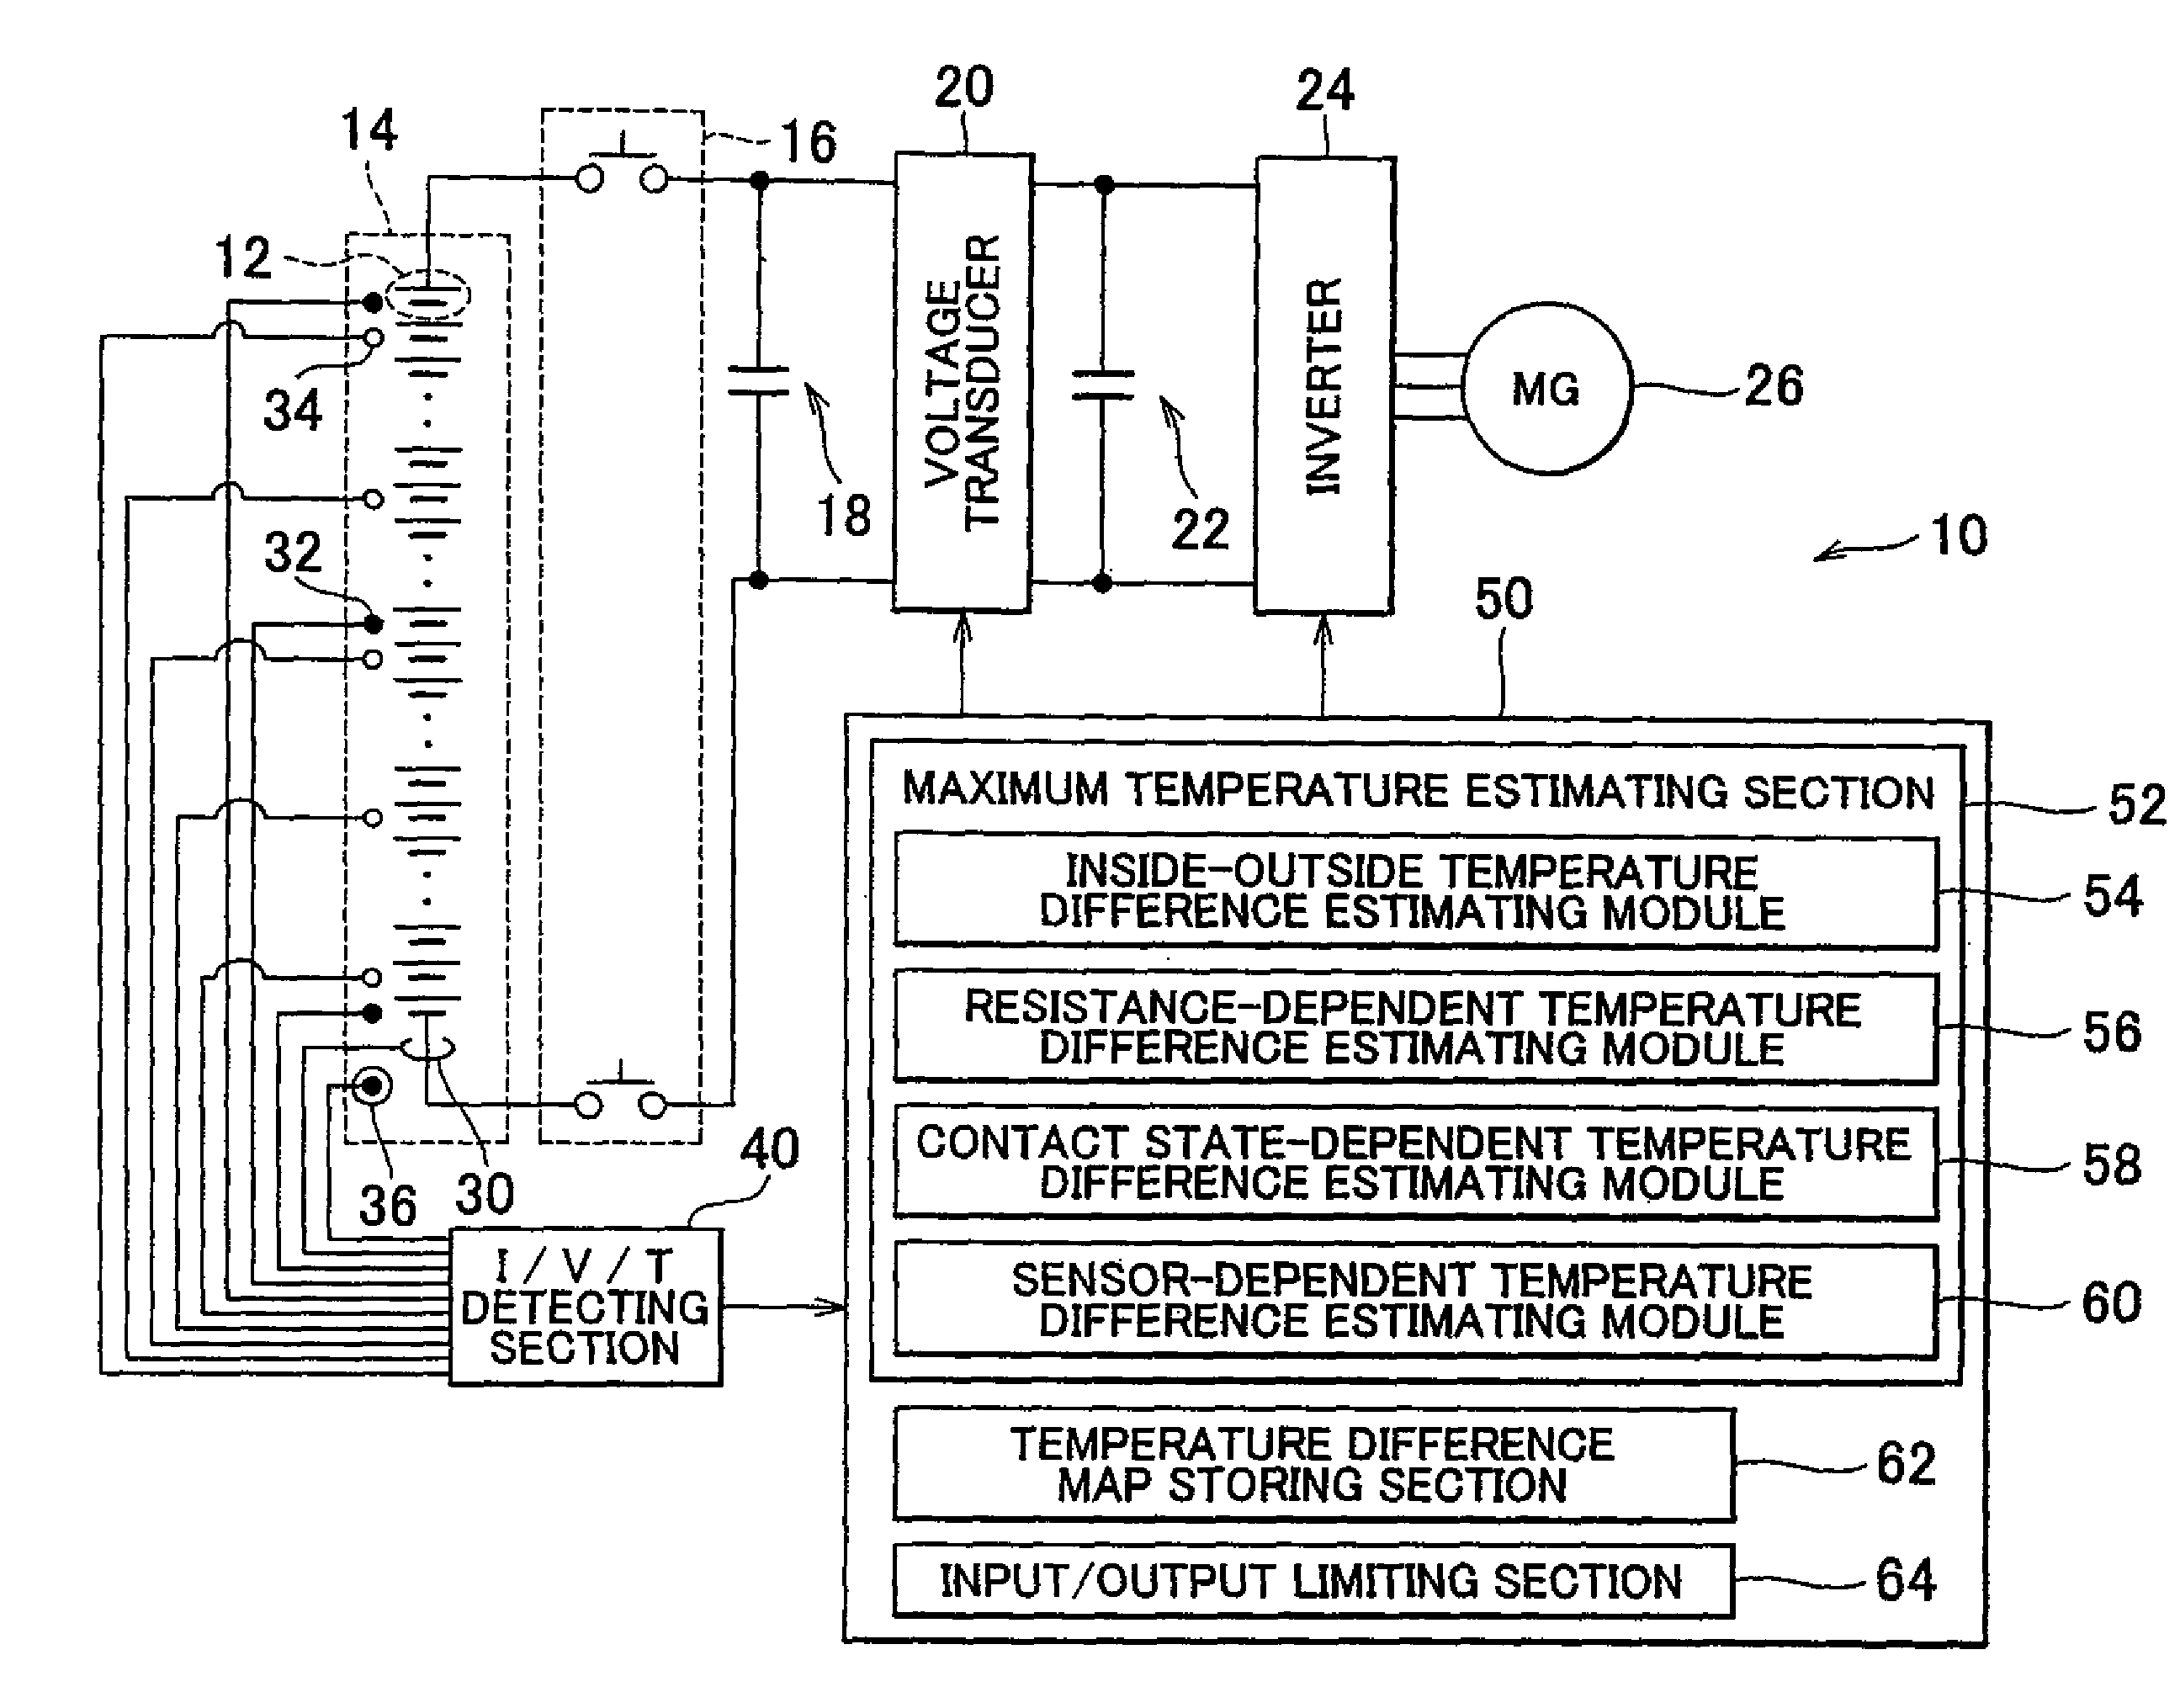 Battery pack input/output control system